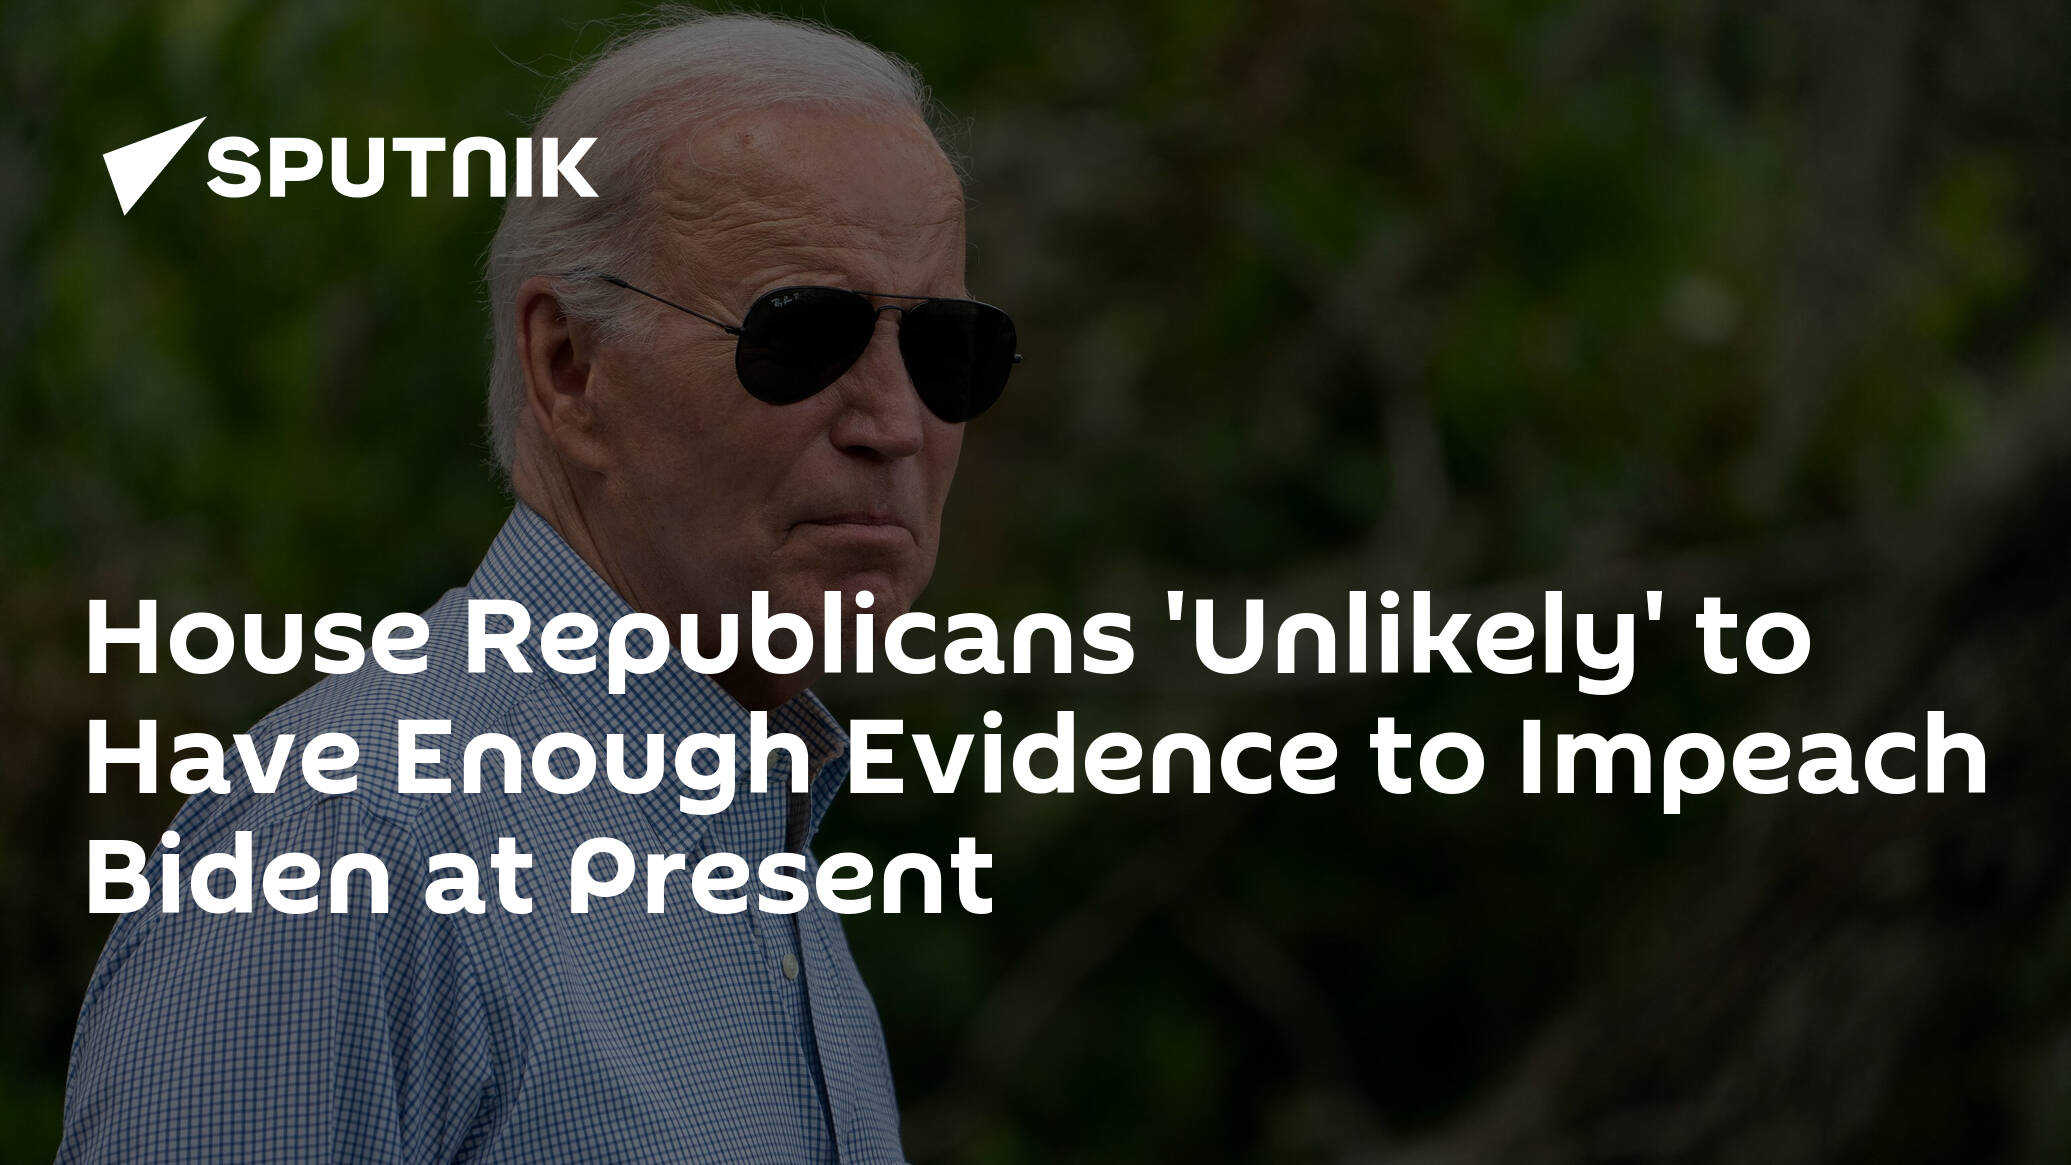 House Republicans 'Unlikely' to Have Enough Evidence to Impeach Biden at Present